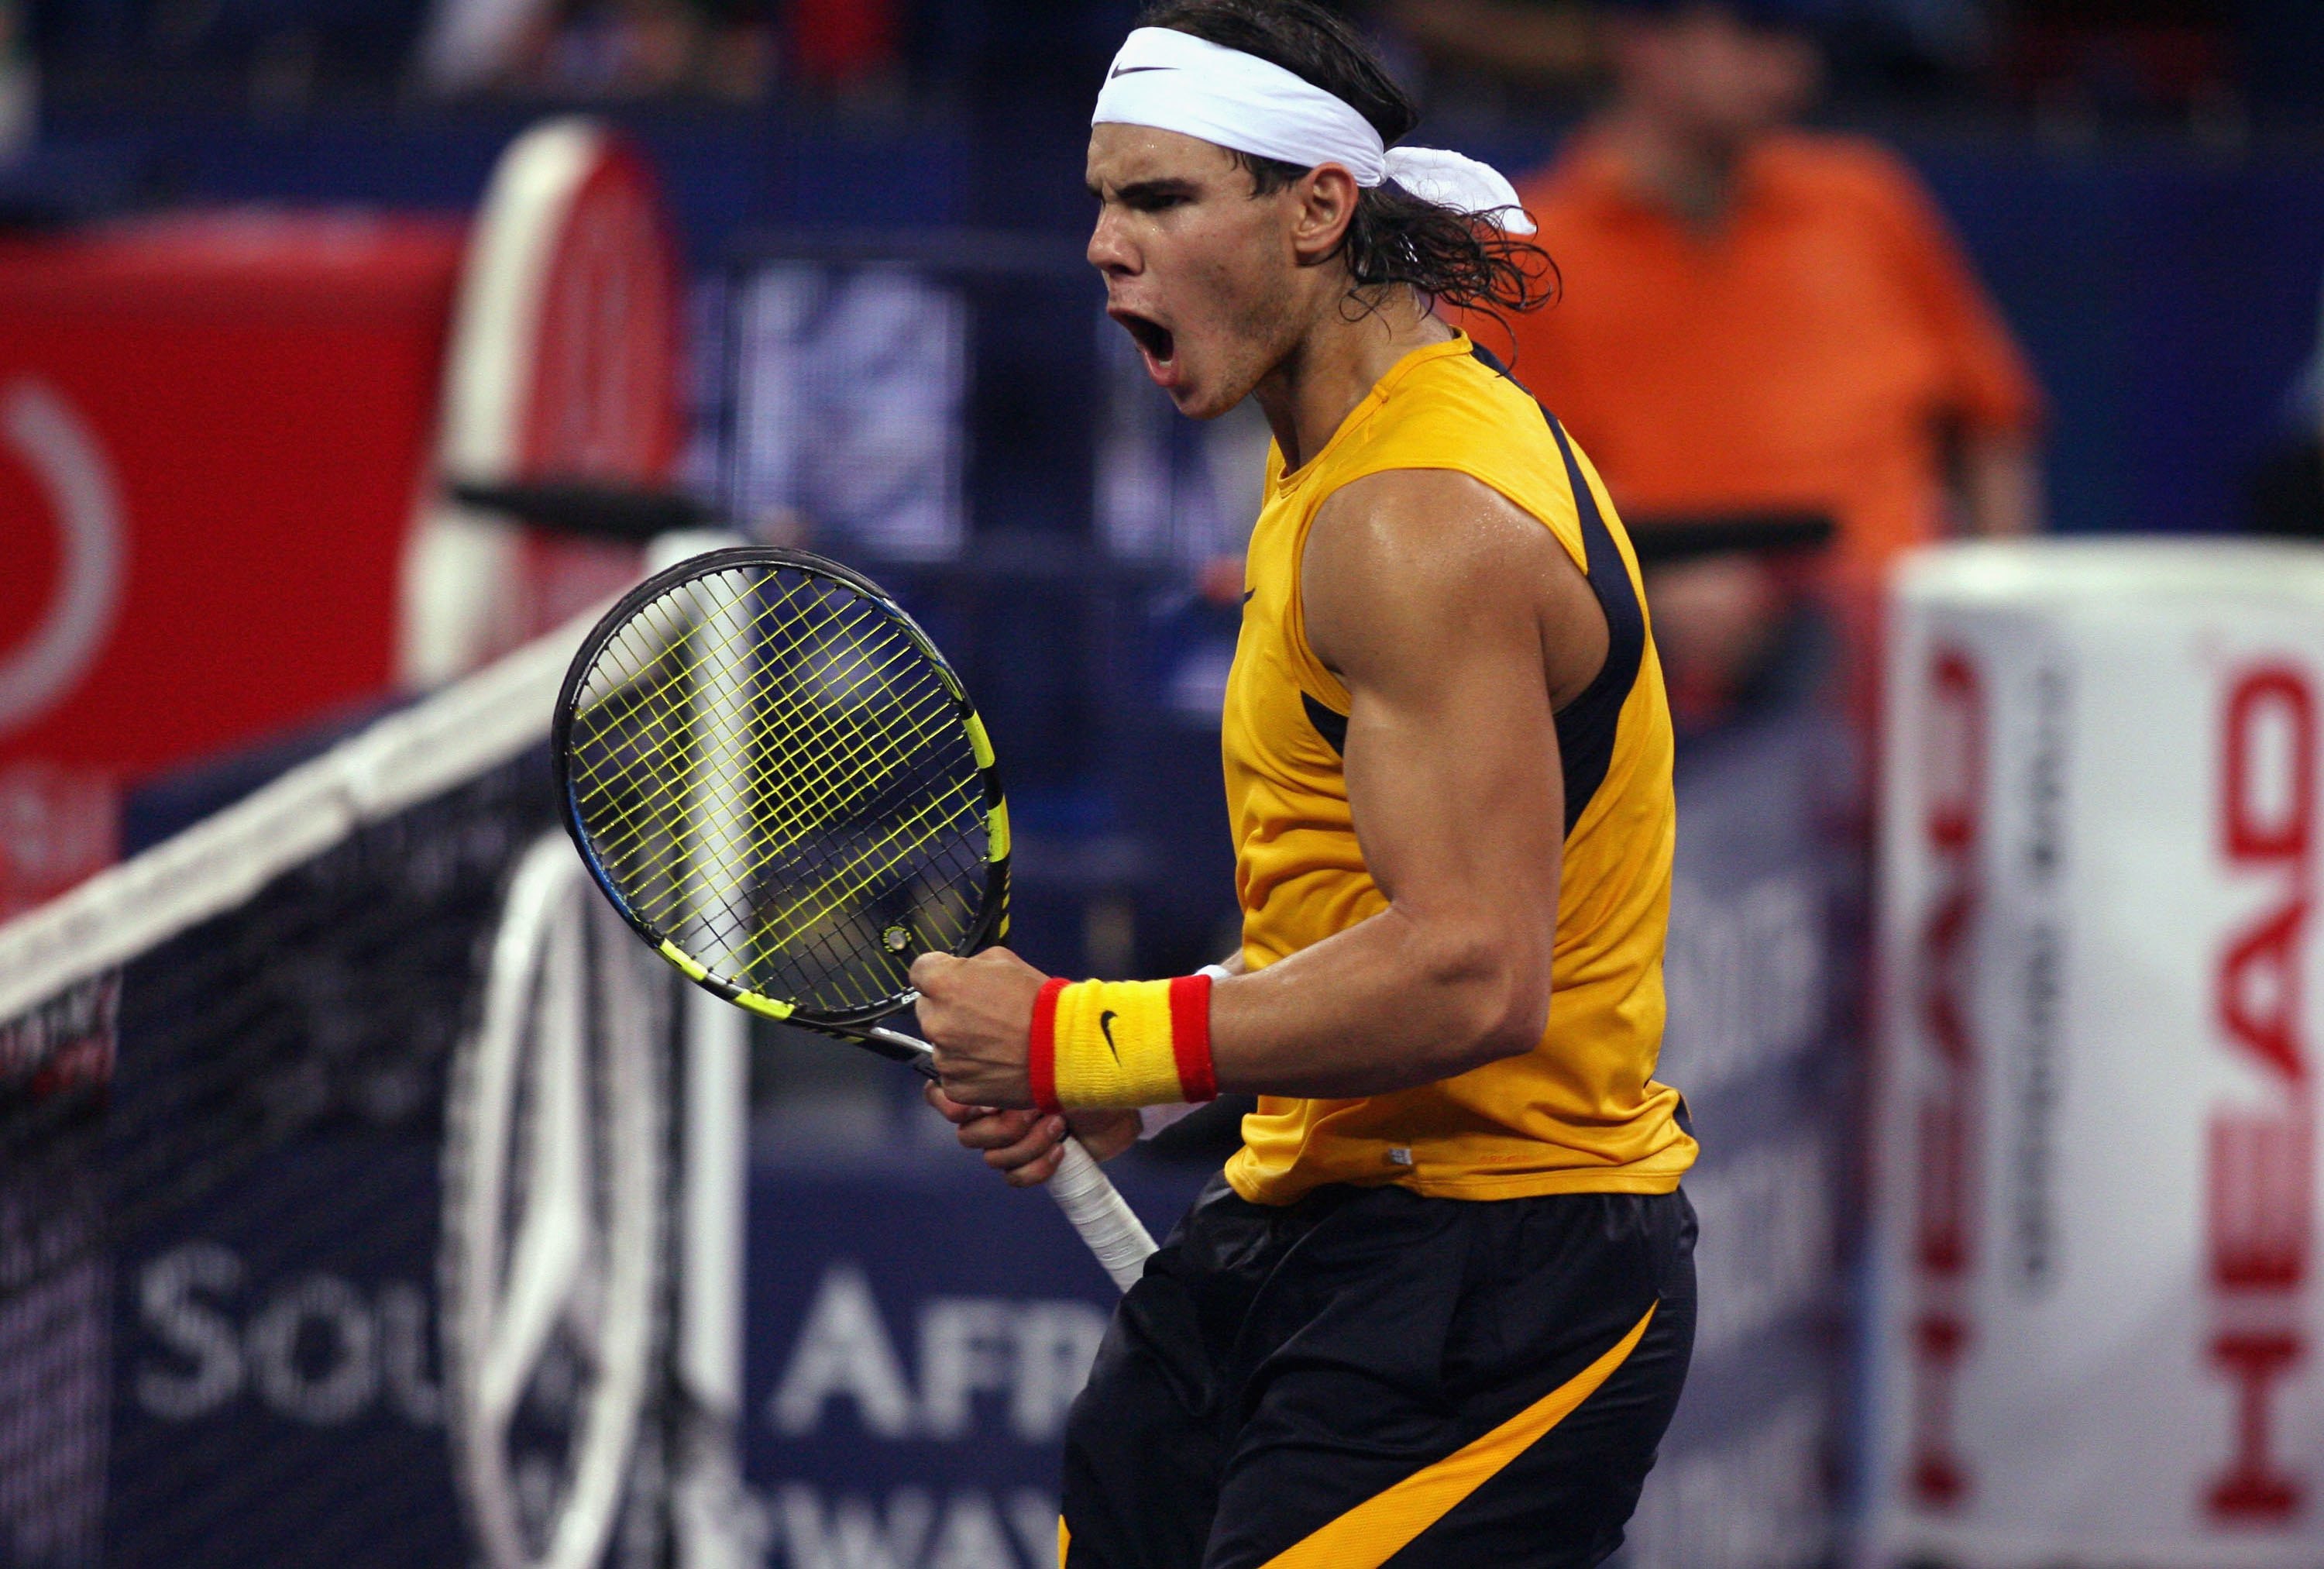 SHANGHAI, CHINA - NOVEMBER 17: (CHINA OUT) Rafael Nadal of Spain reacts during his last round robin match against Nikolay Davydenko of Russia at the Tennis Masters Cup Shanghai on November 17, 2006 at the Qi Zhong Tennis Stadium in Shanghai, China. (Photo by China Photos/Getty Images)